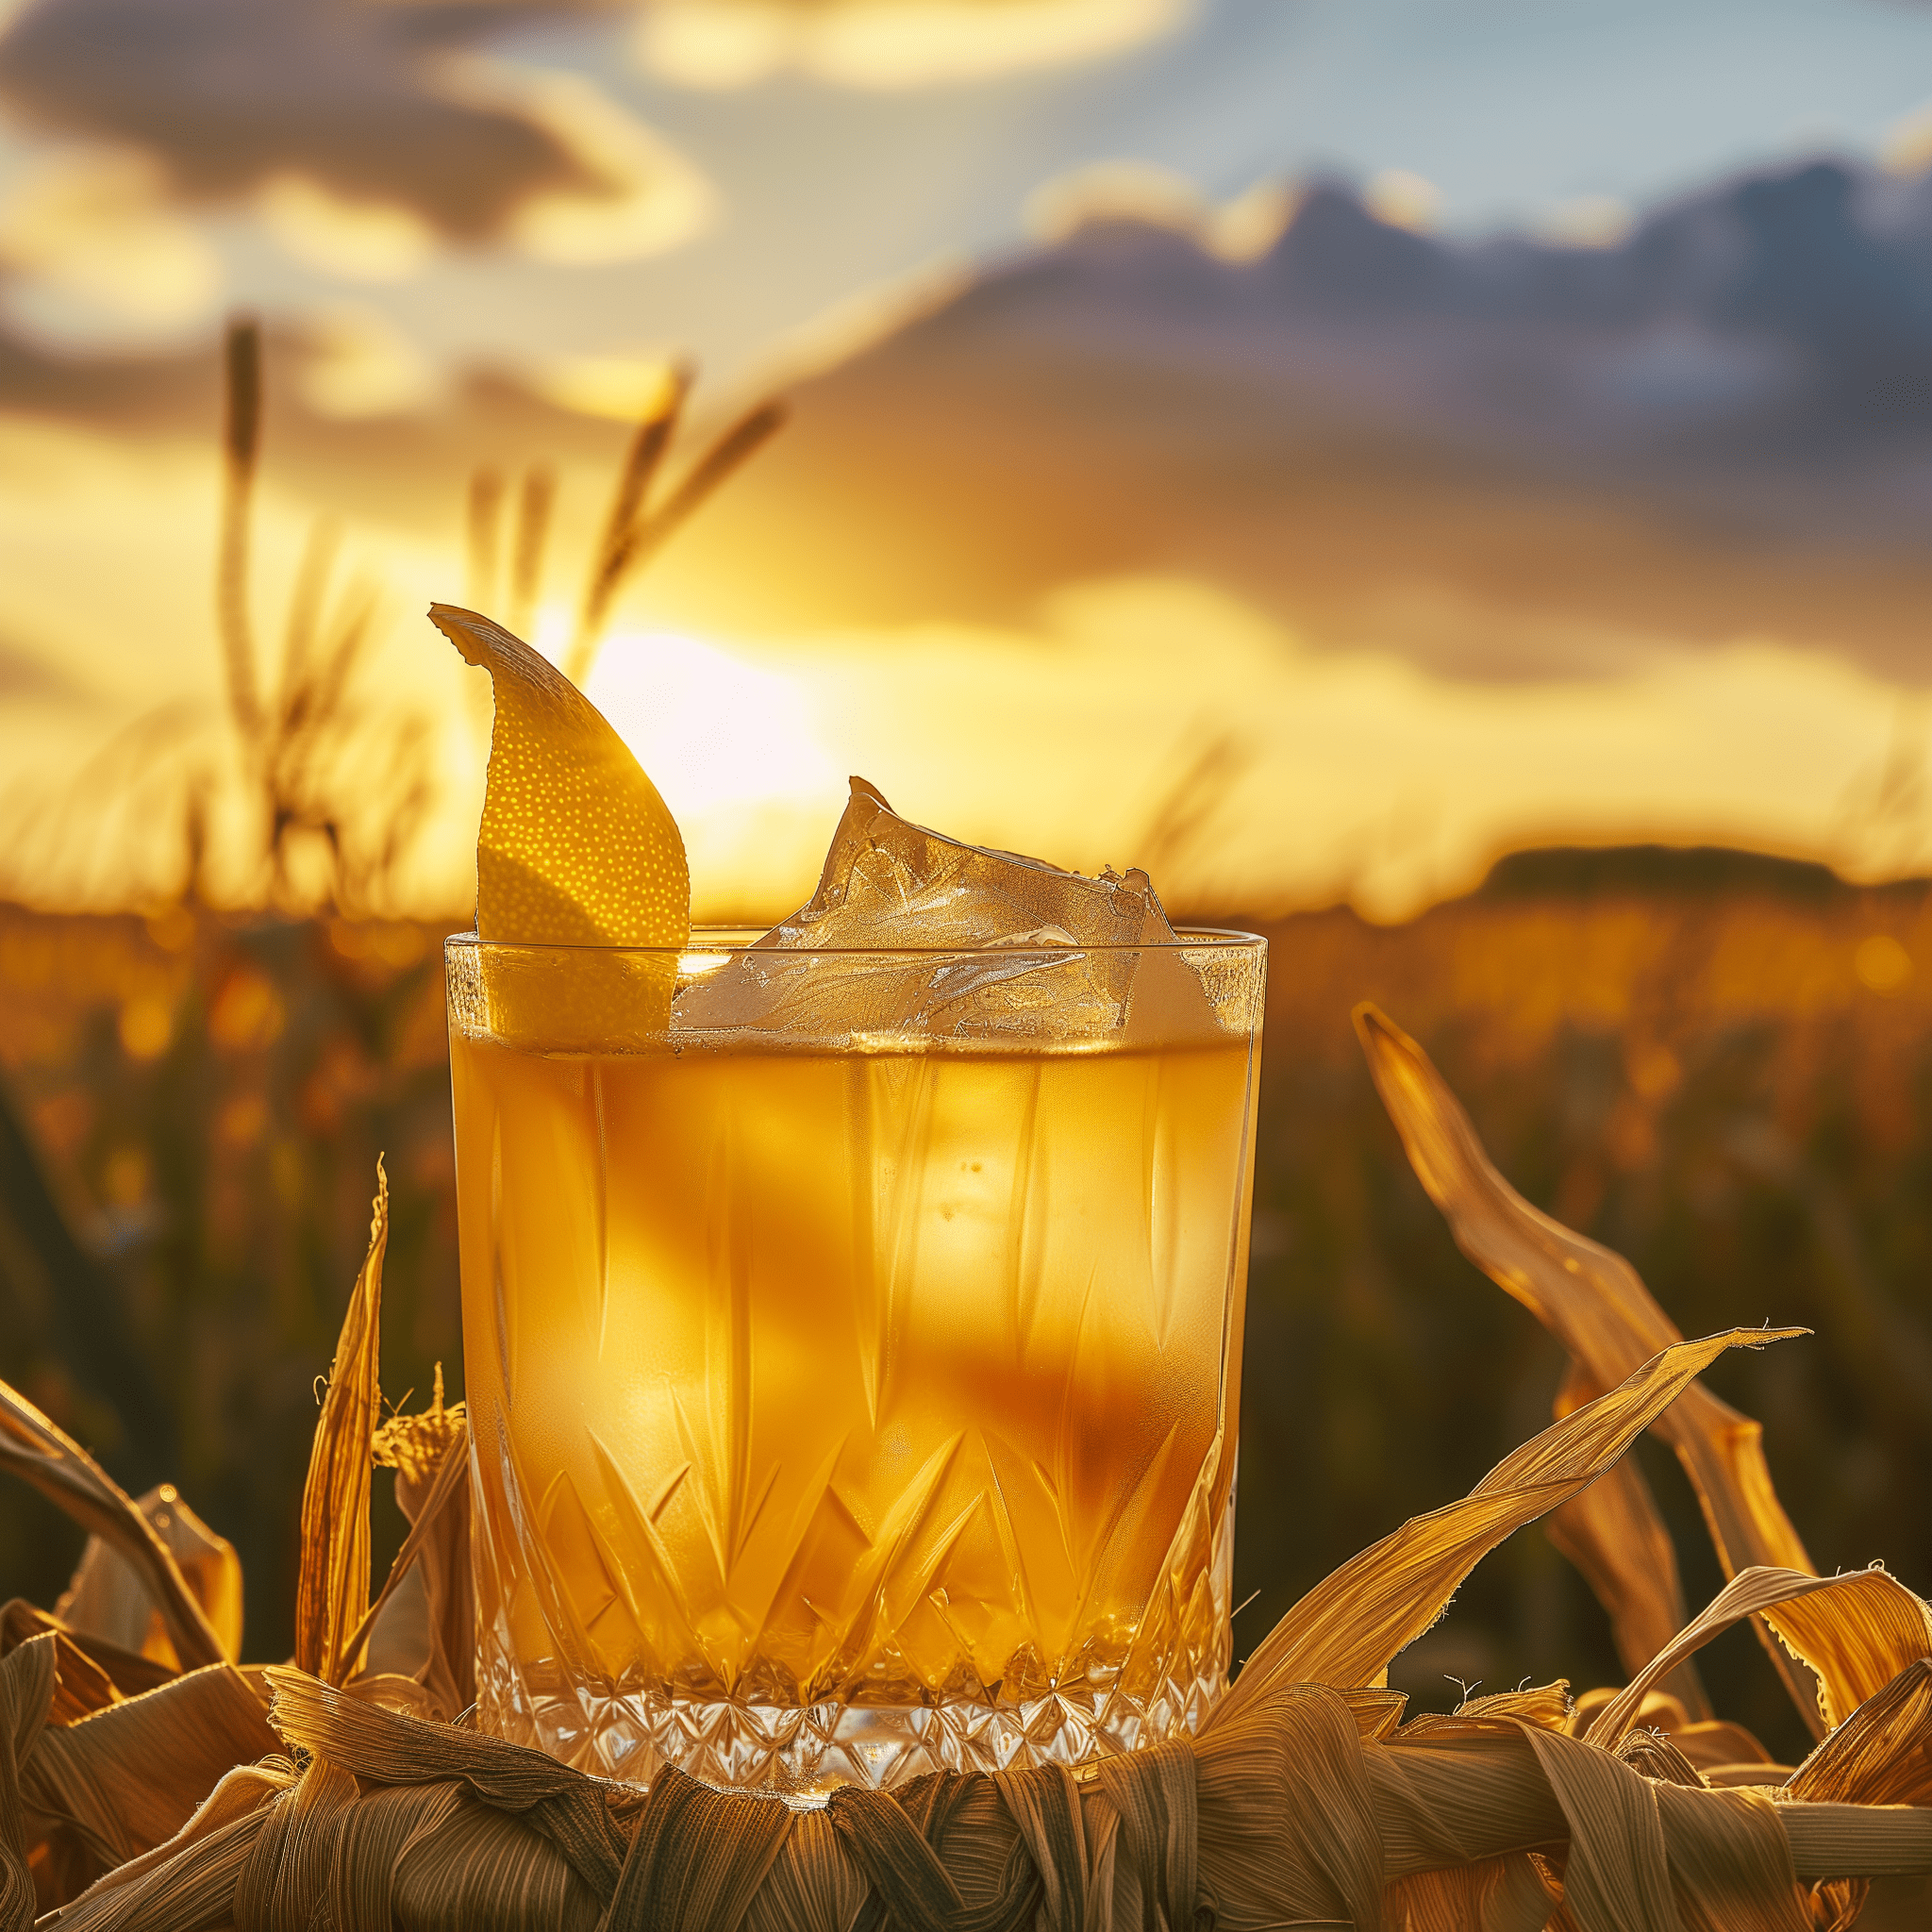 Maize Mirage Cocktail Recipe - The Maize Mirage offers a symphony of flavors. It's a rich, full-bodied cocktail with a sweet corn forefront, complemented by the herbal and slightly bitter undertones of the Americano bianco. The finish is smooth with a warm whisky embrace.